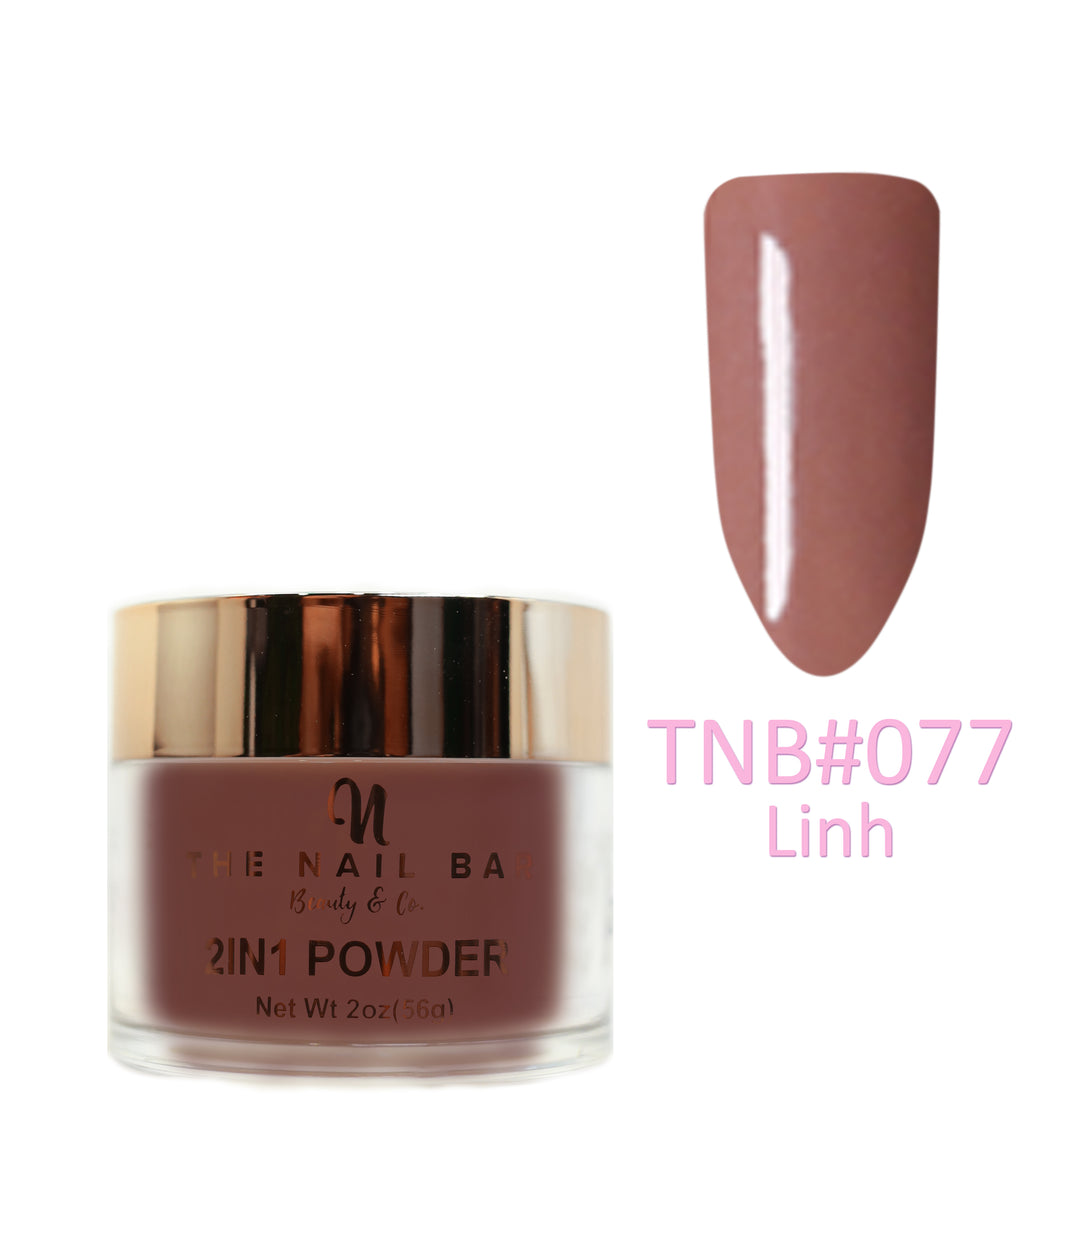 2-In-1 Dipping/Acrylic colour powder (2oz) -Linh - The Nail Bar Beauty & Co.